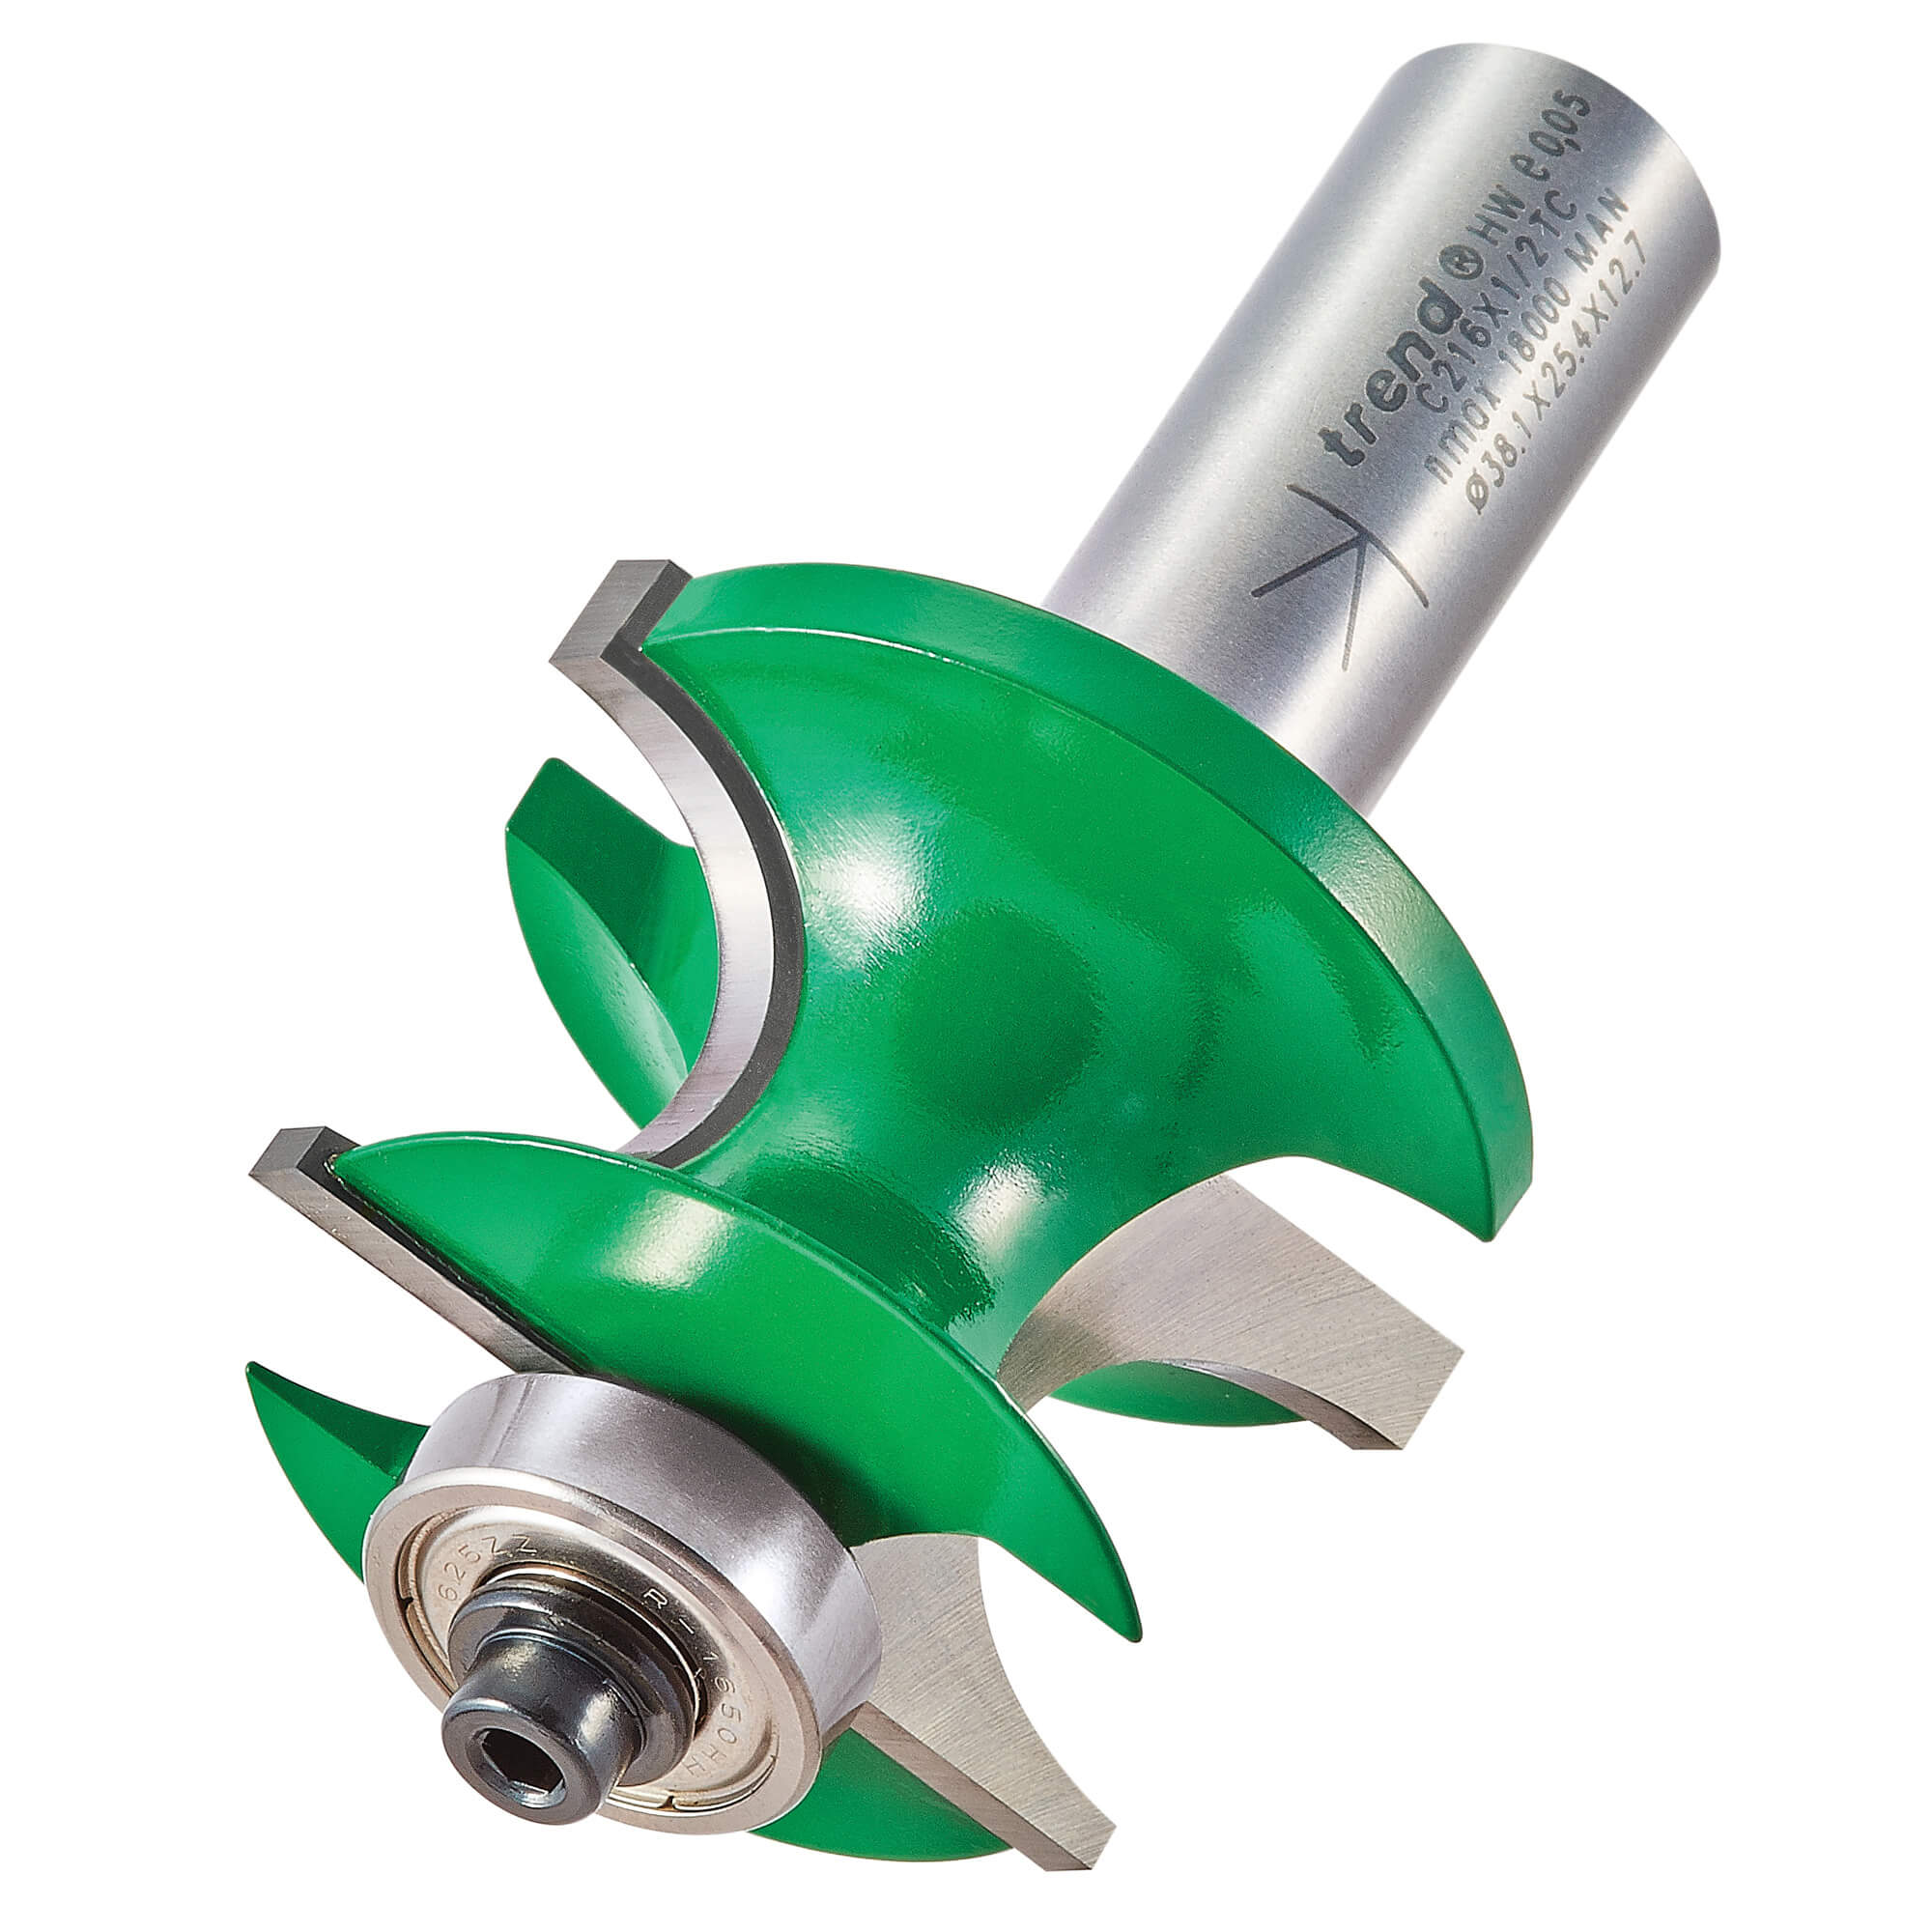 Image of Trend CRAFTPRO Bearing Guided Corner Bead Router Cutter 38.1mm 16mm 1/2"